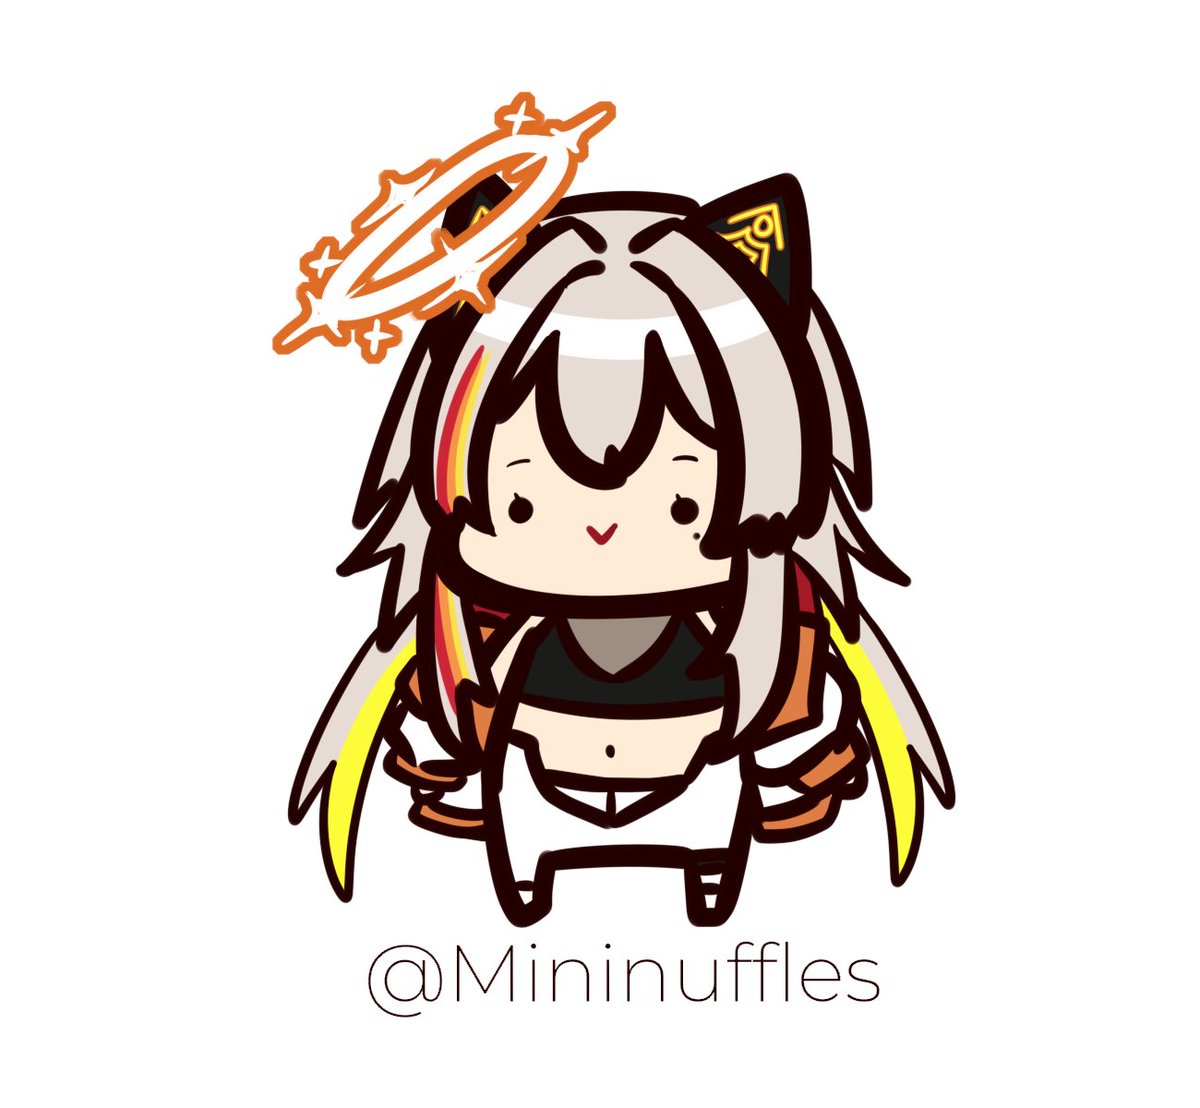 「Day 65: Uriel Cheebpractice doodle for t」|Mininuffles | Commissions Open!のイラスト